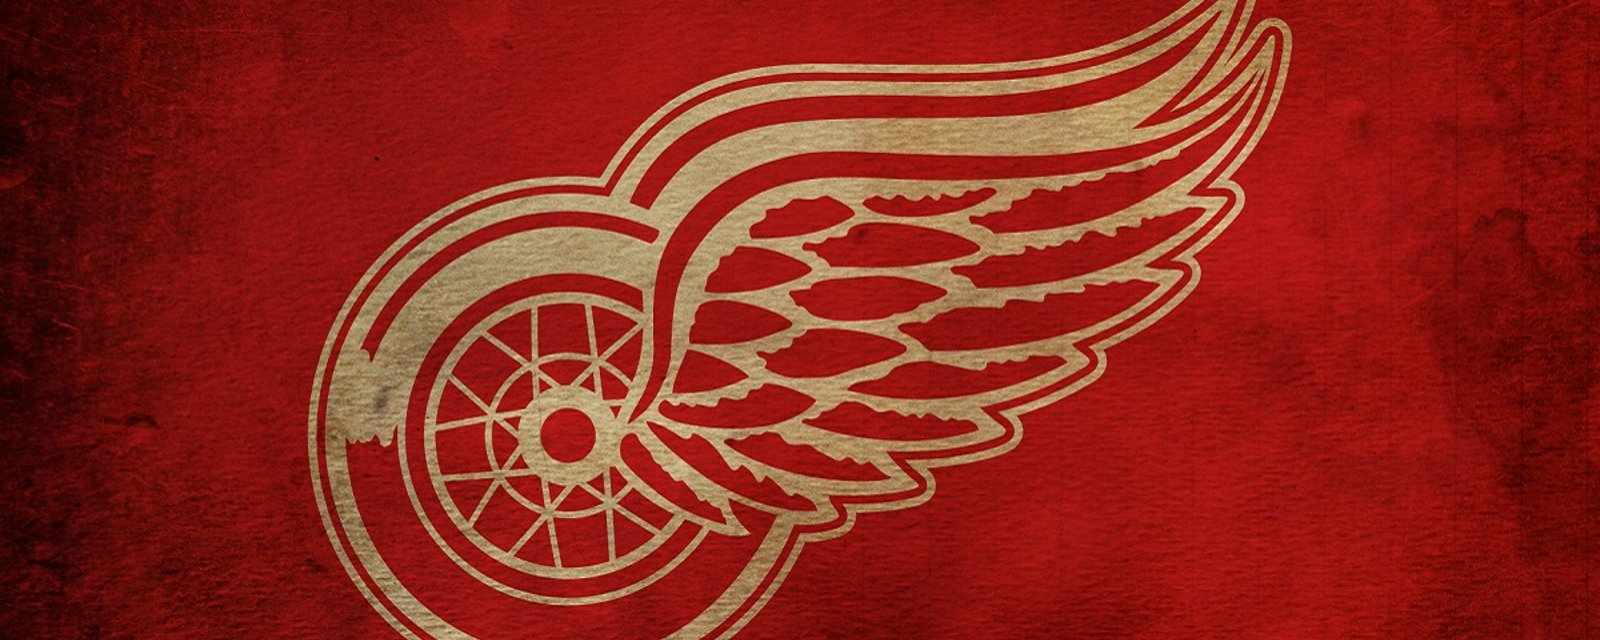 Report: Red Wings lose another key player as the plummet to the bottom of the division.